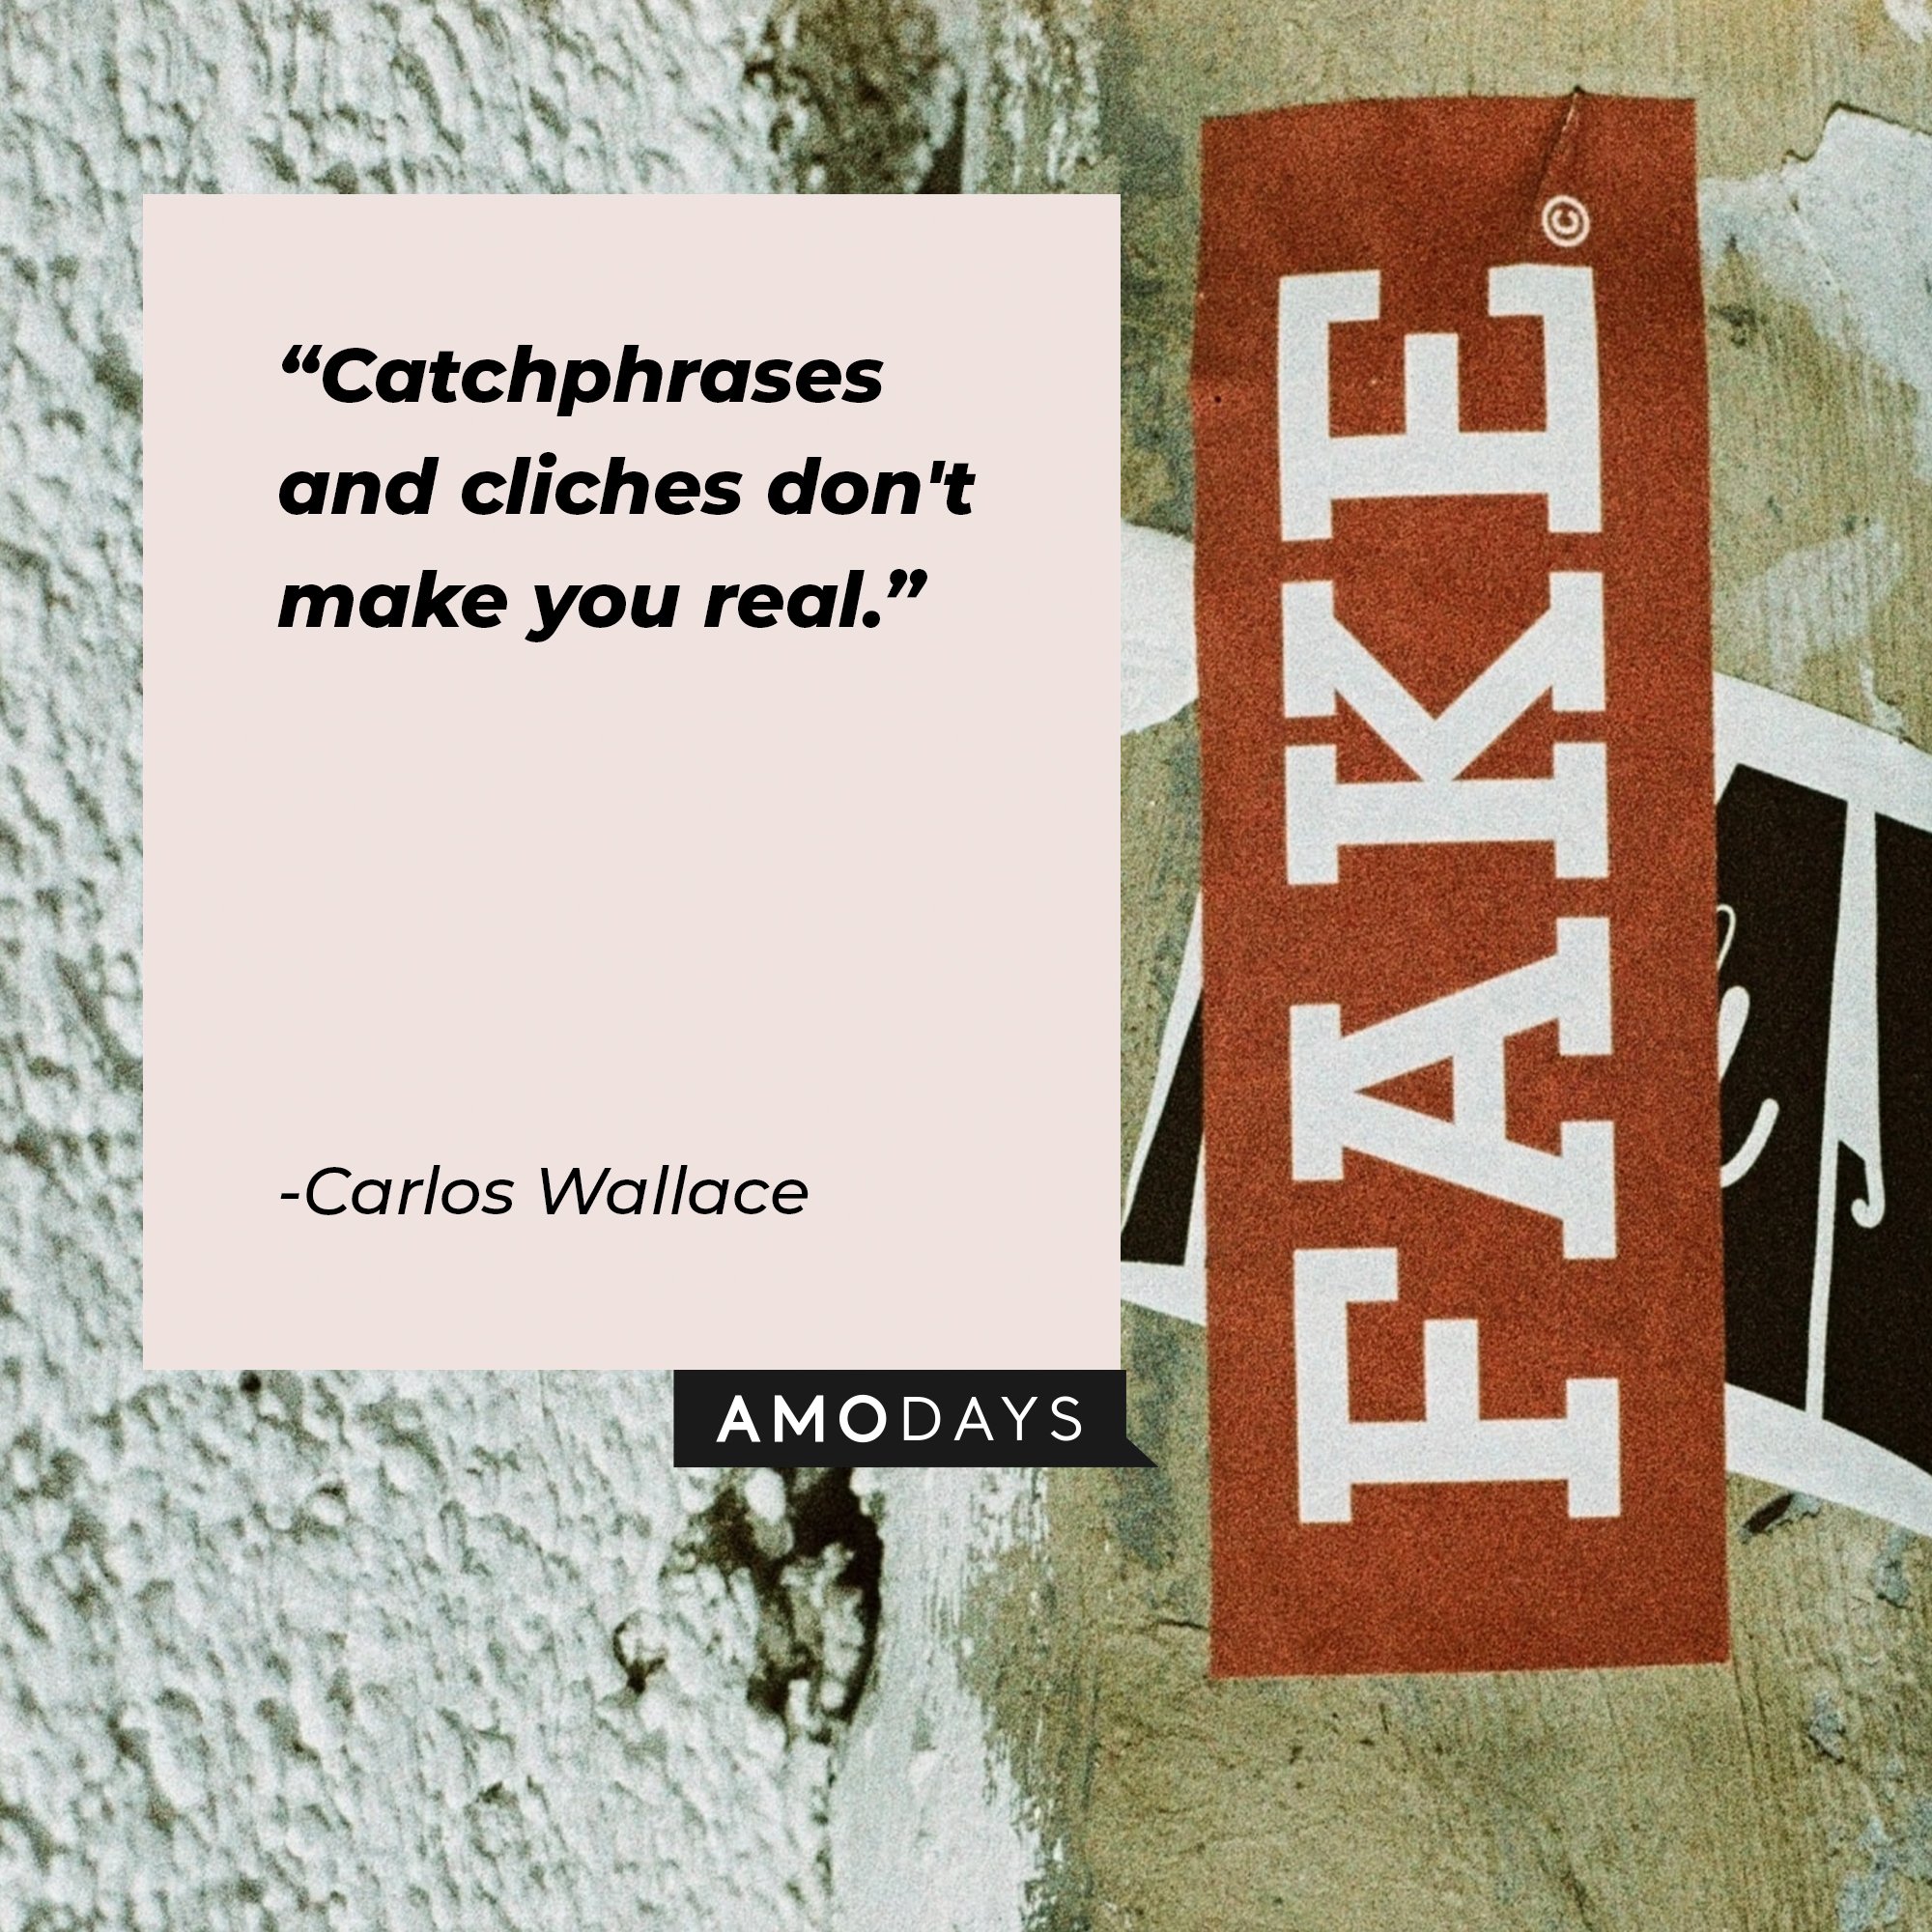 Carlos Wallace’s quote: "Catchphrases and cliches don't make you real." | Image: AmoDays